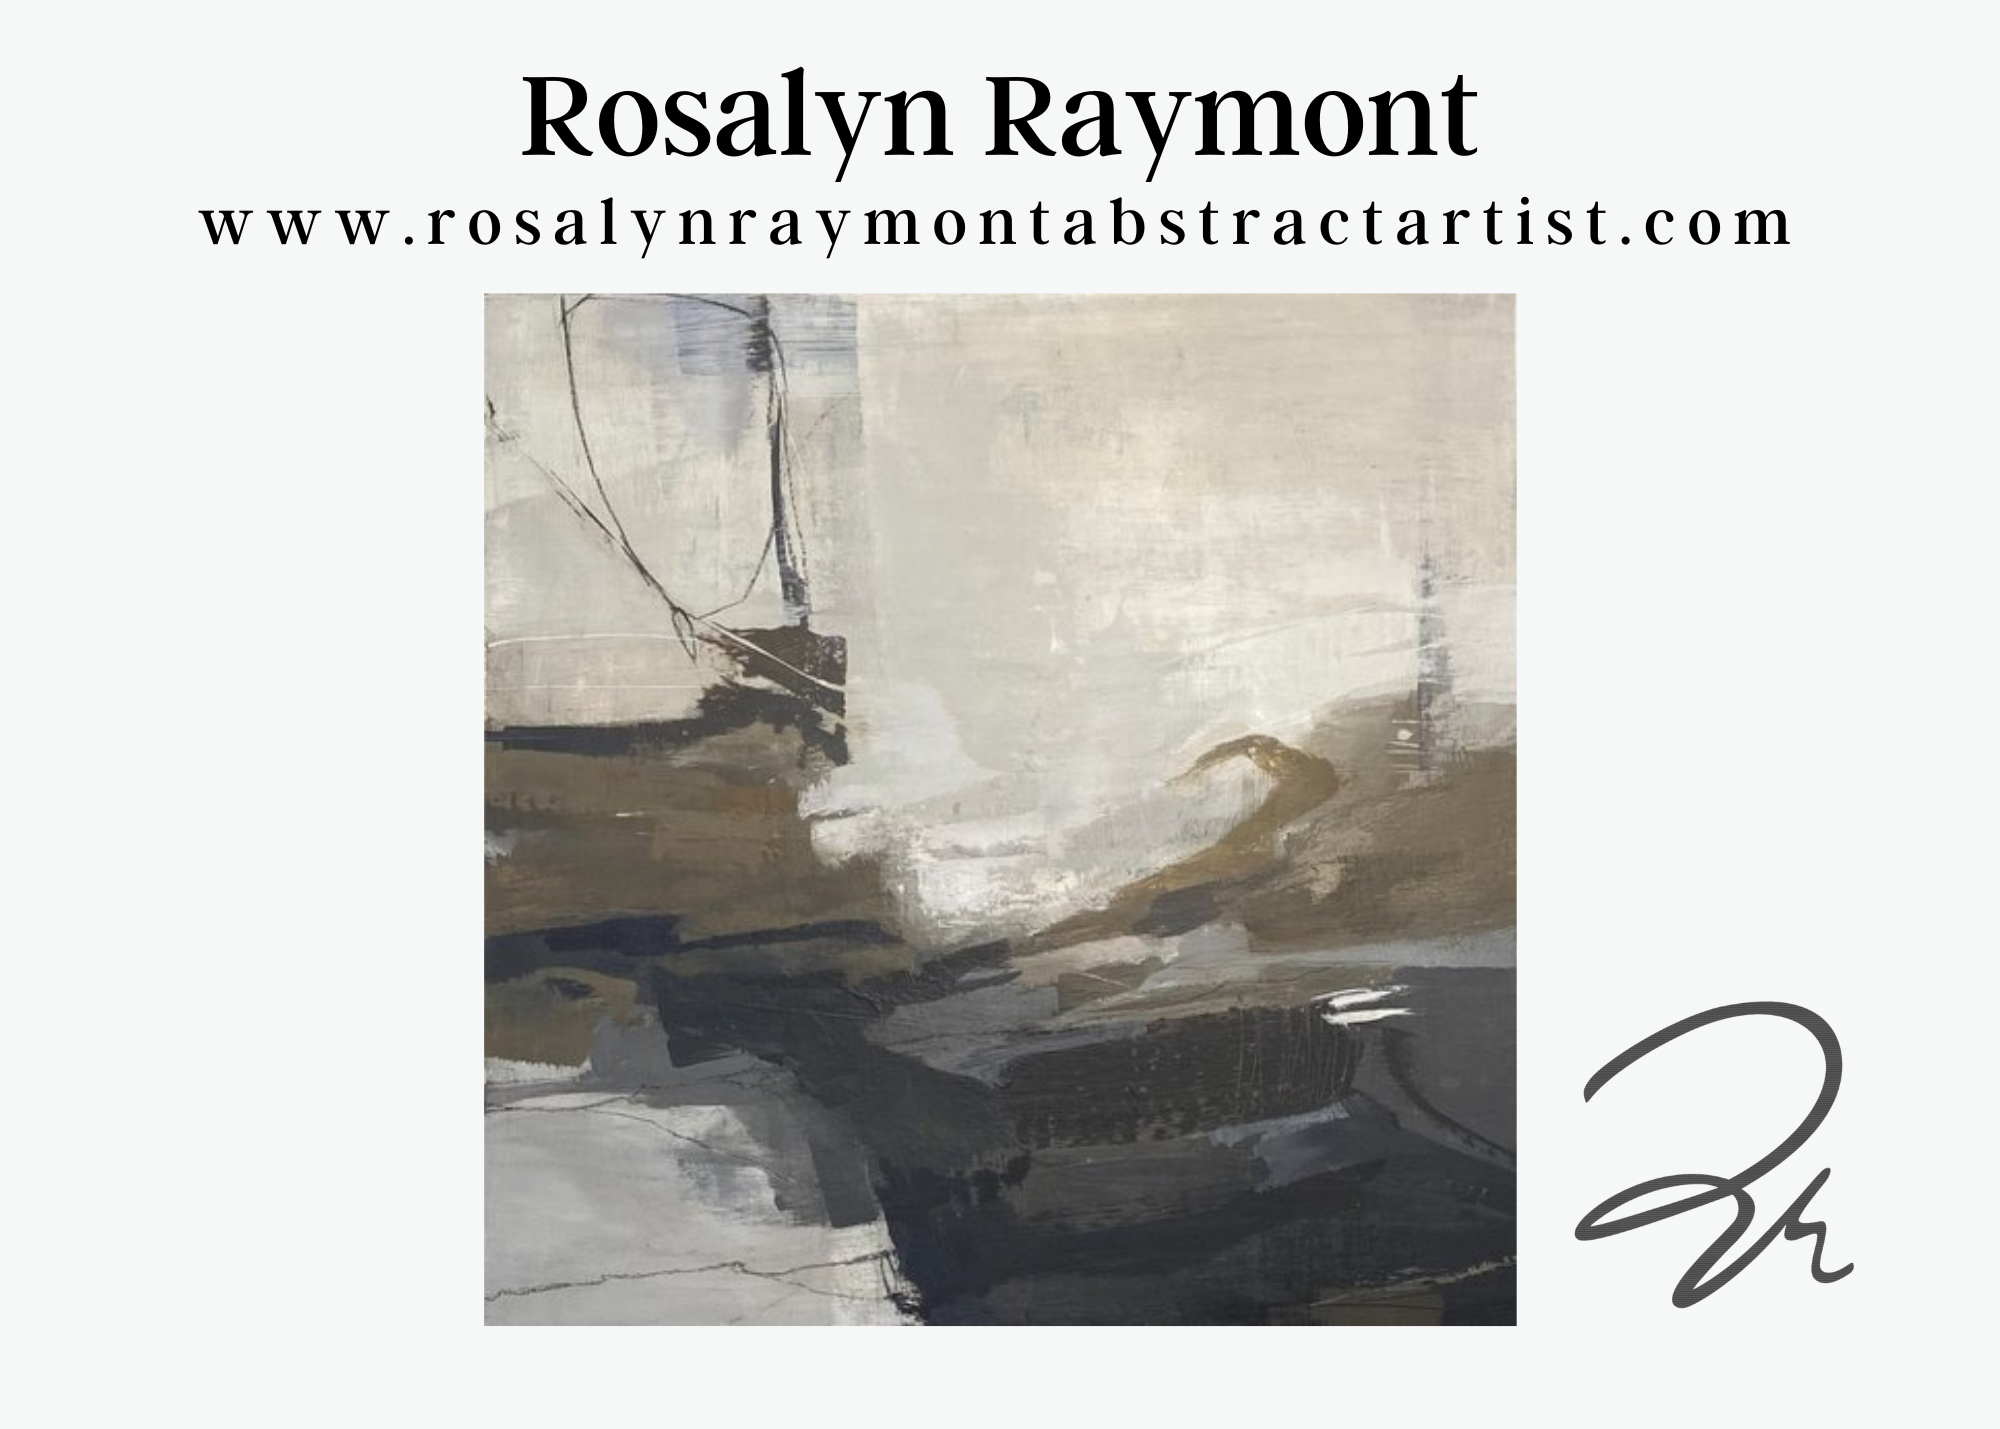 Rosalyn raymont art, down to earth collection piece 